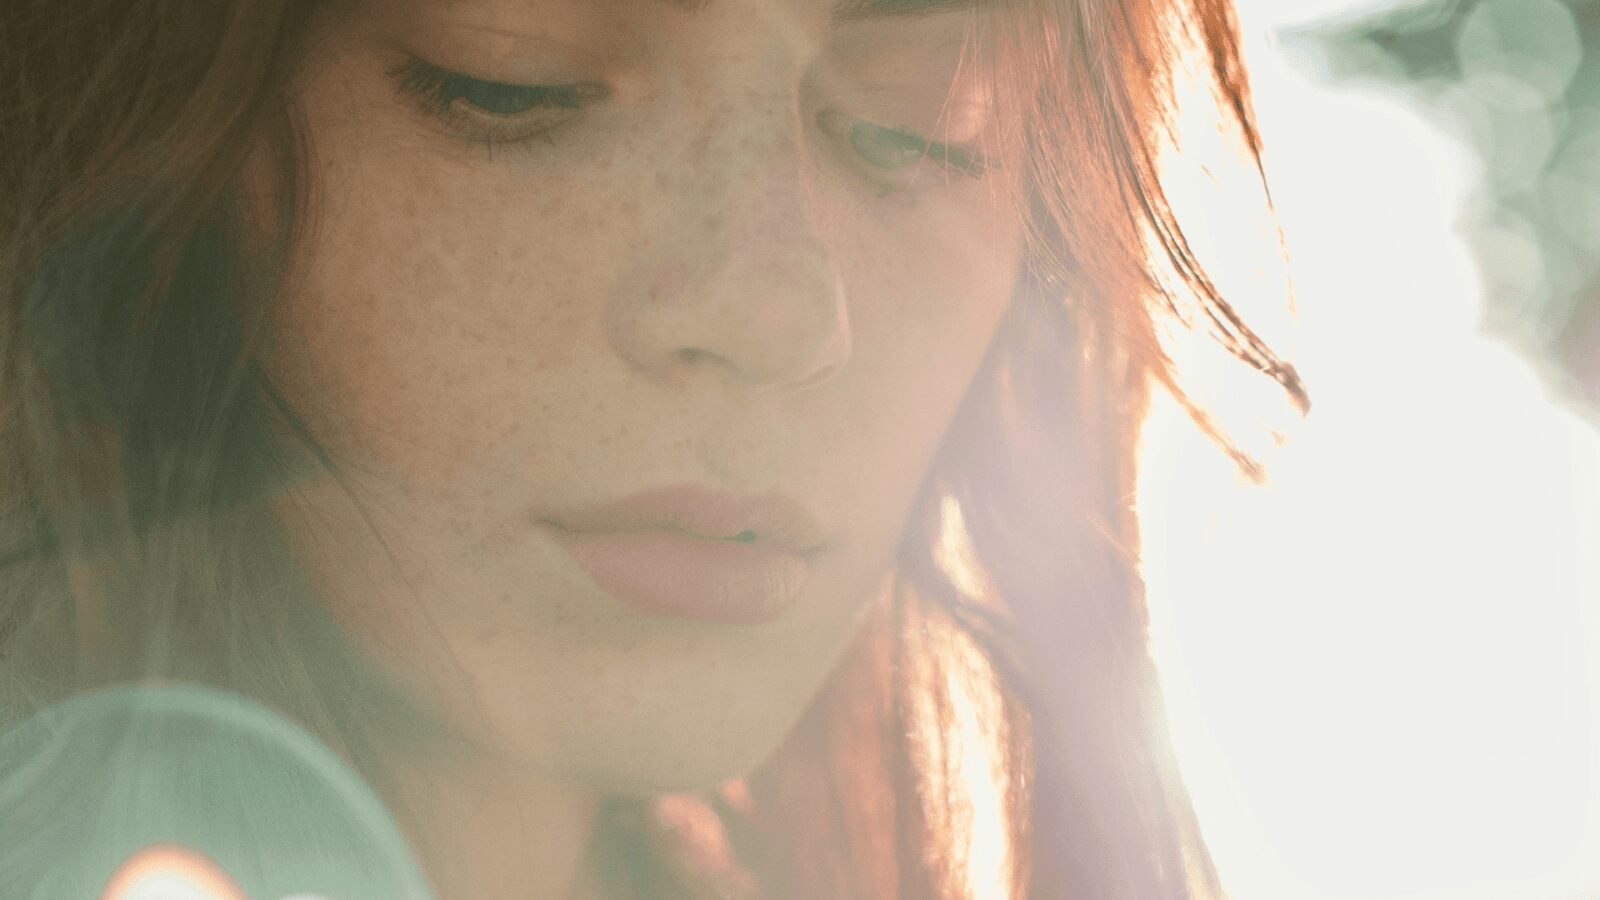 A Sneaky Way Redheads Are Being Exposed to the Sun’s UV Rays